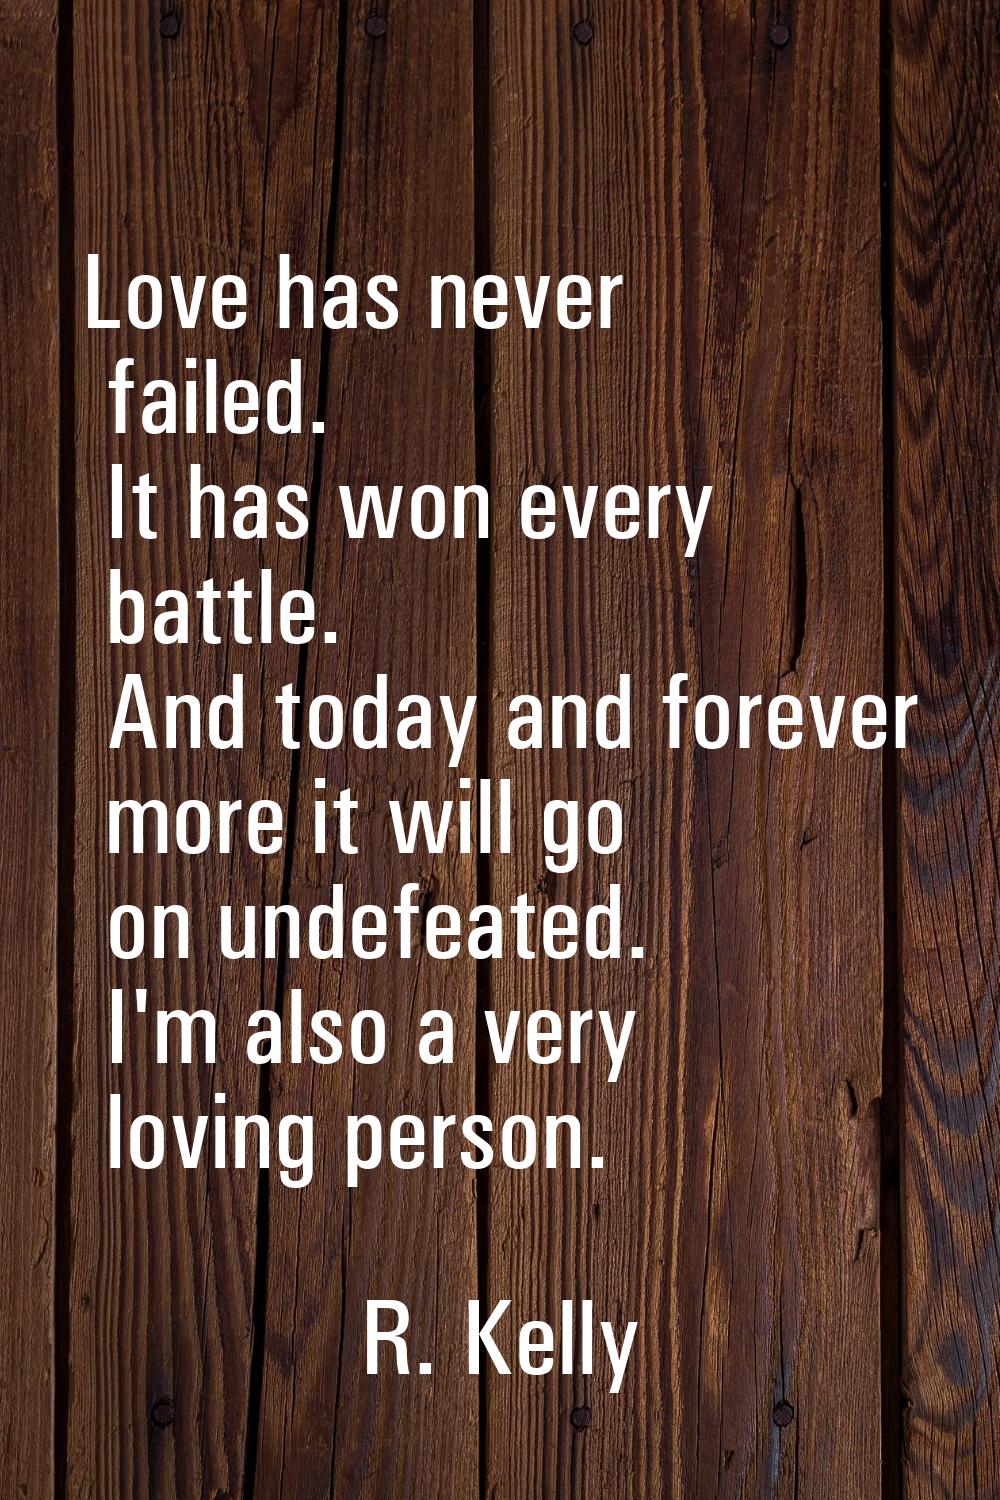 Love has never failed. It has won every battle. And today and forever more it will go on undefeated